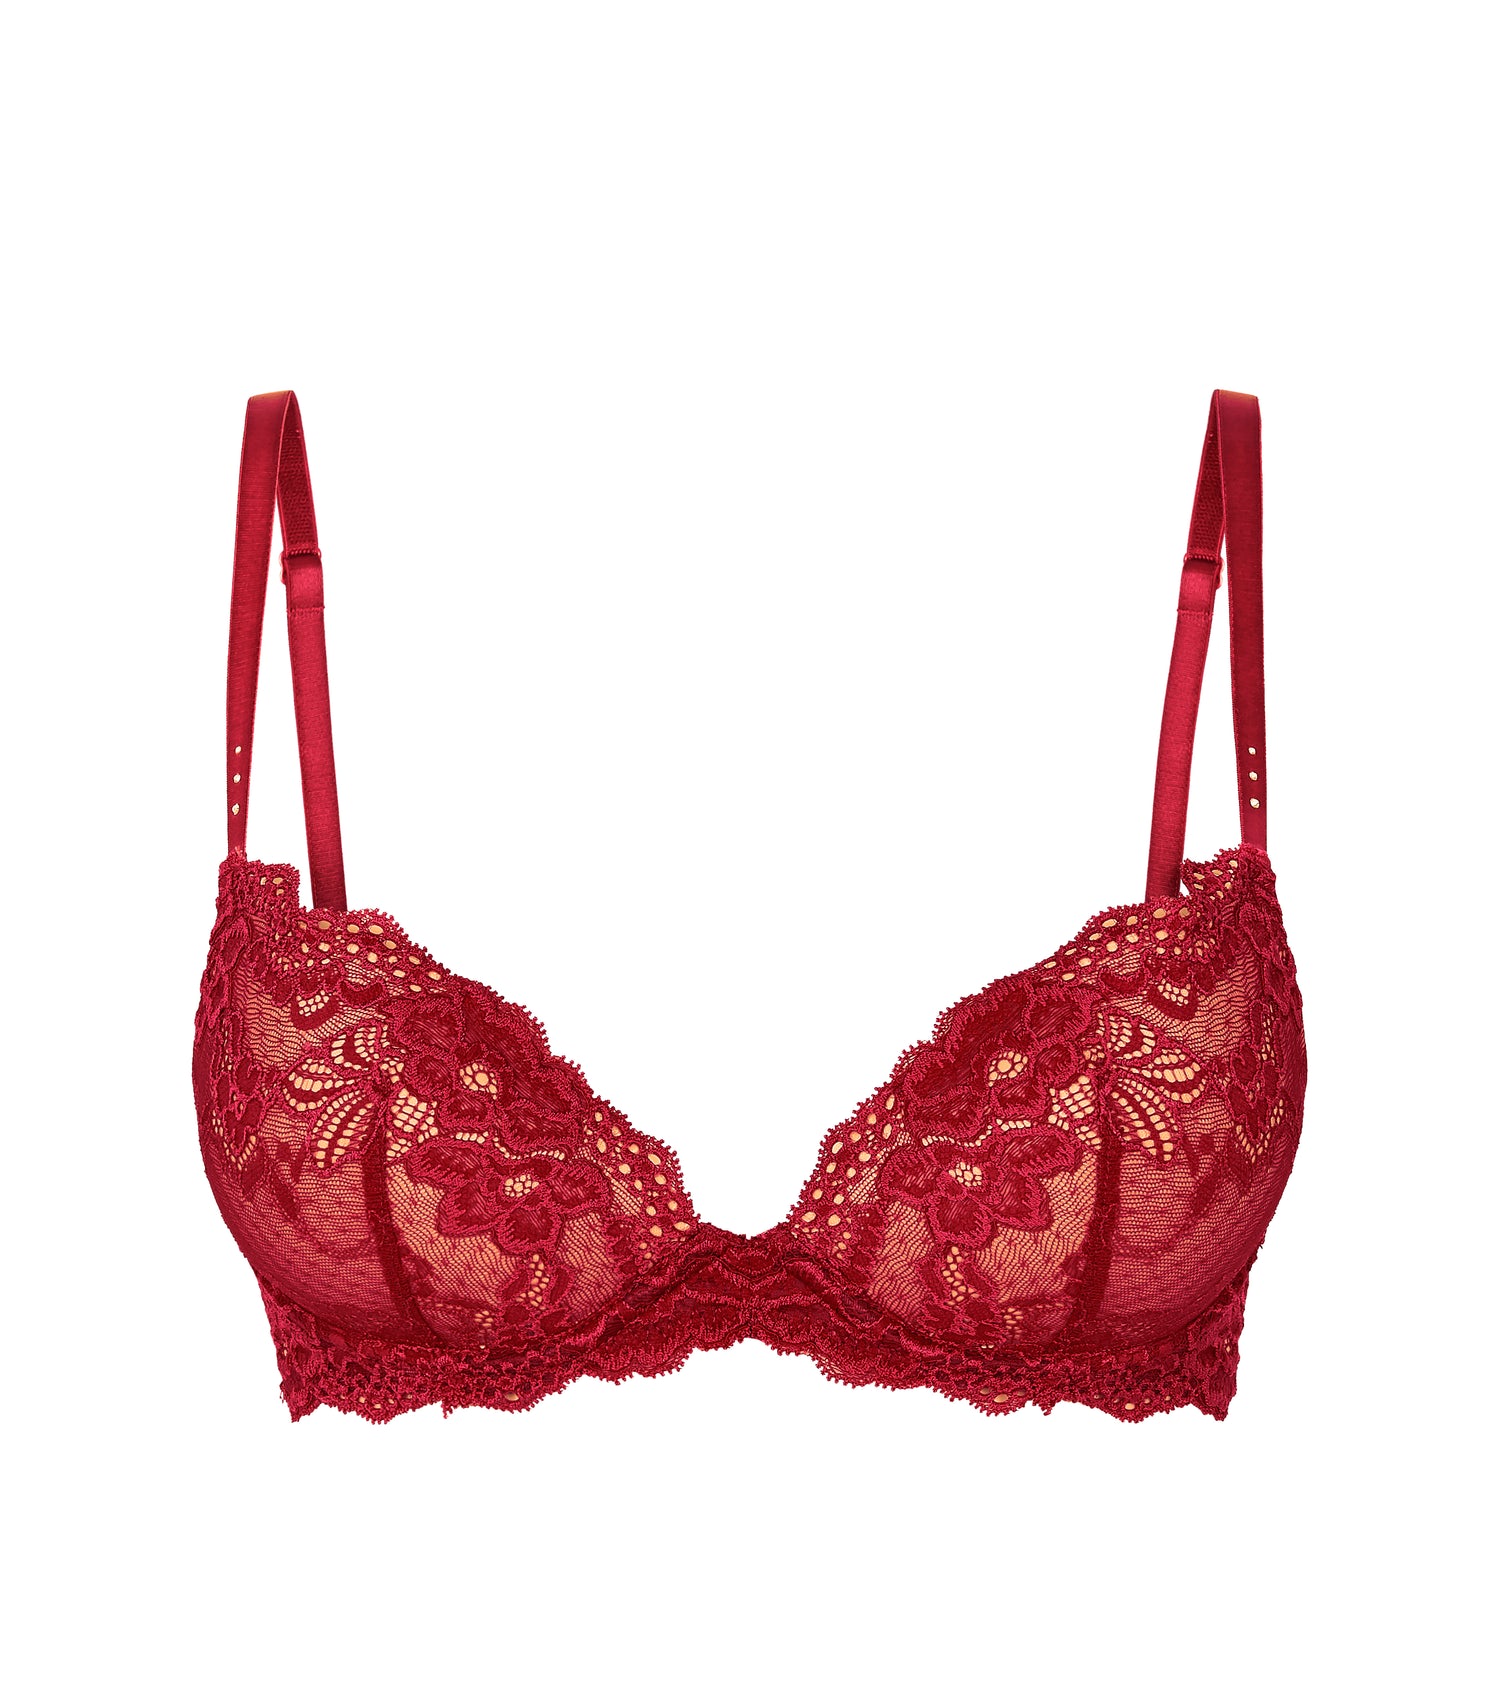 New Woman's Auden Sublime Ripe Red Plunge Coverage Push Up Bra (46C) (42D)  V.